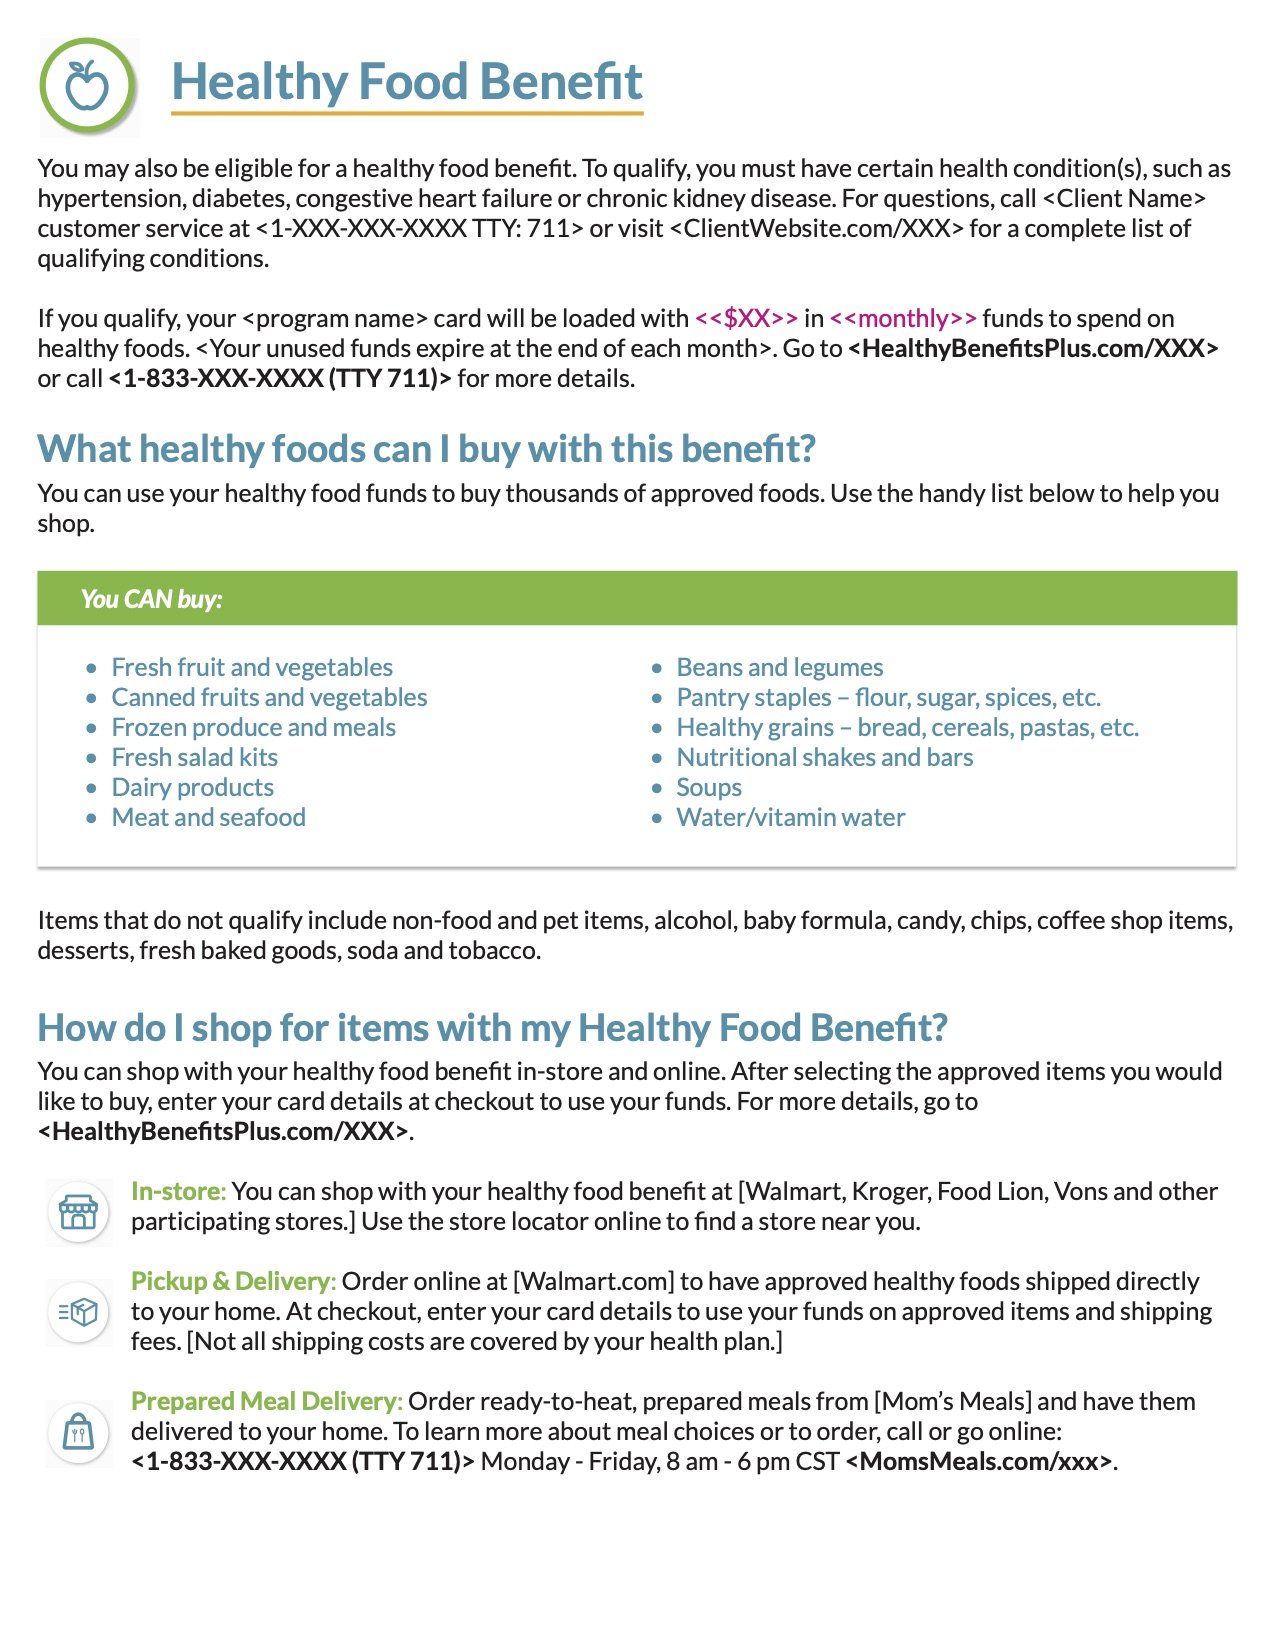 OTC and Healthy Food Letter